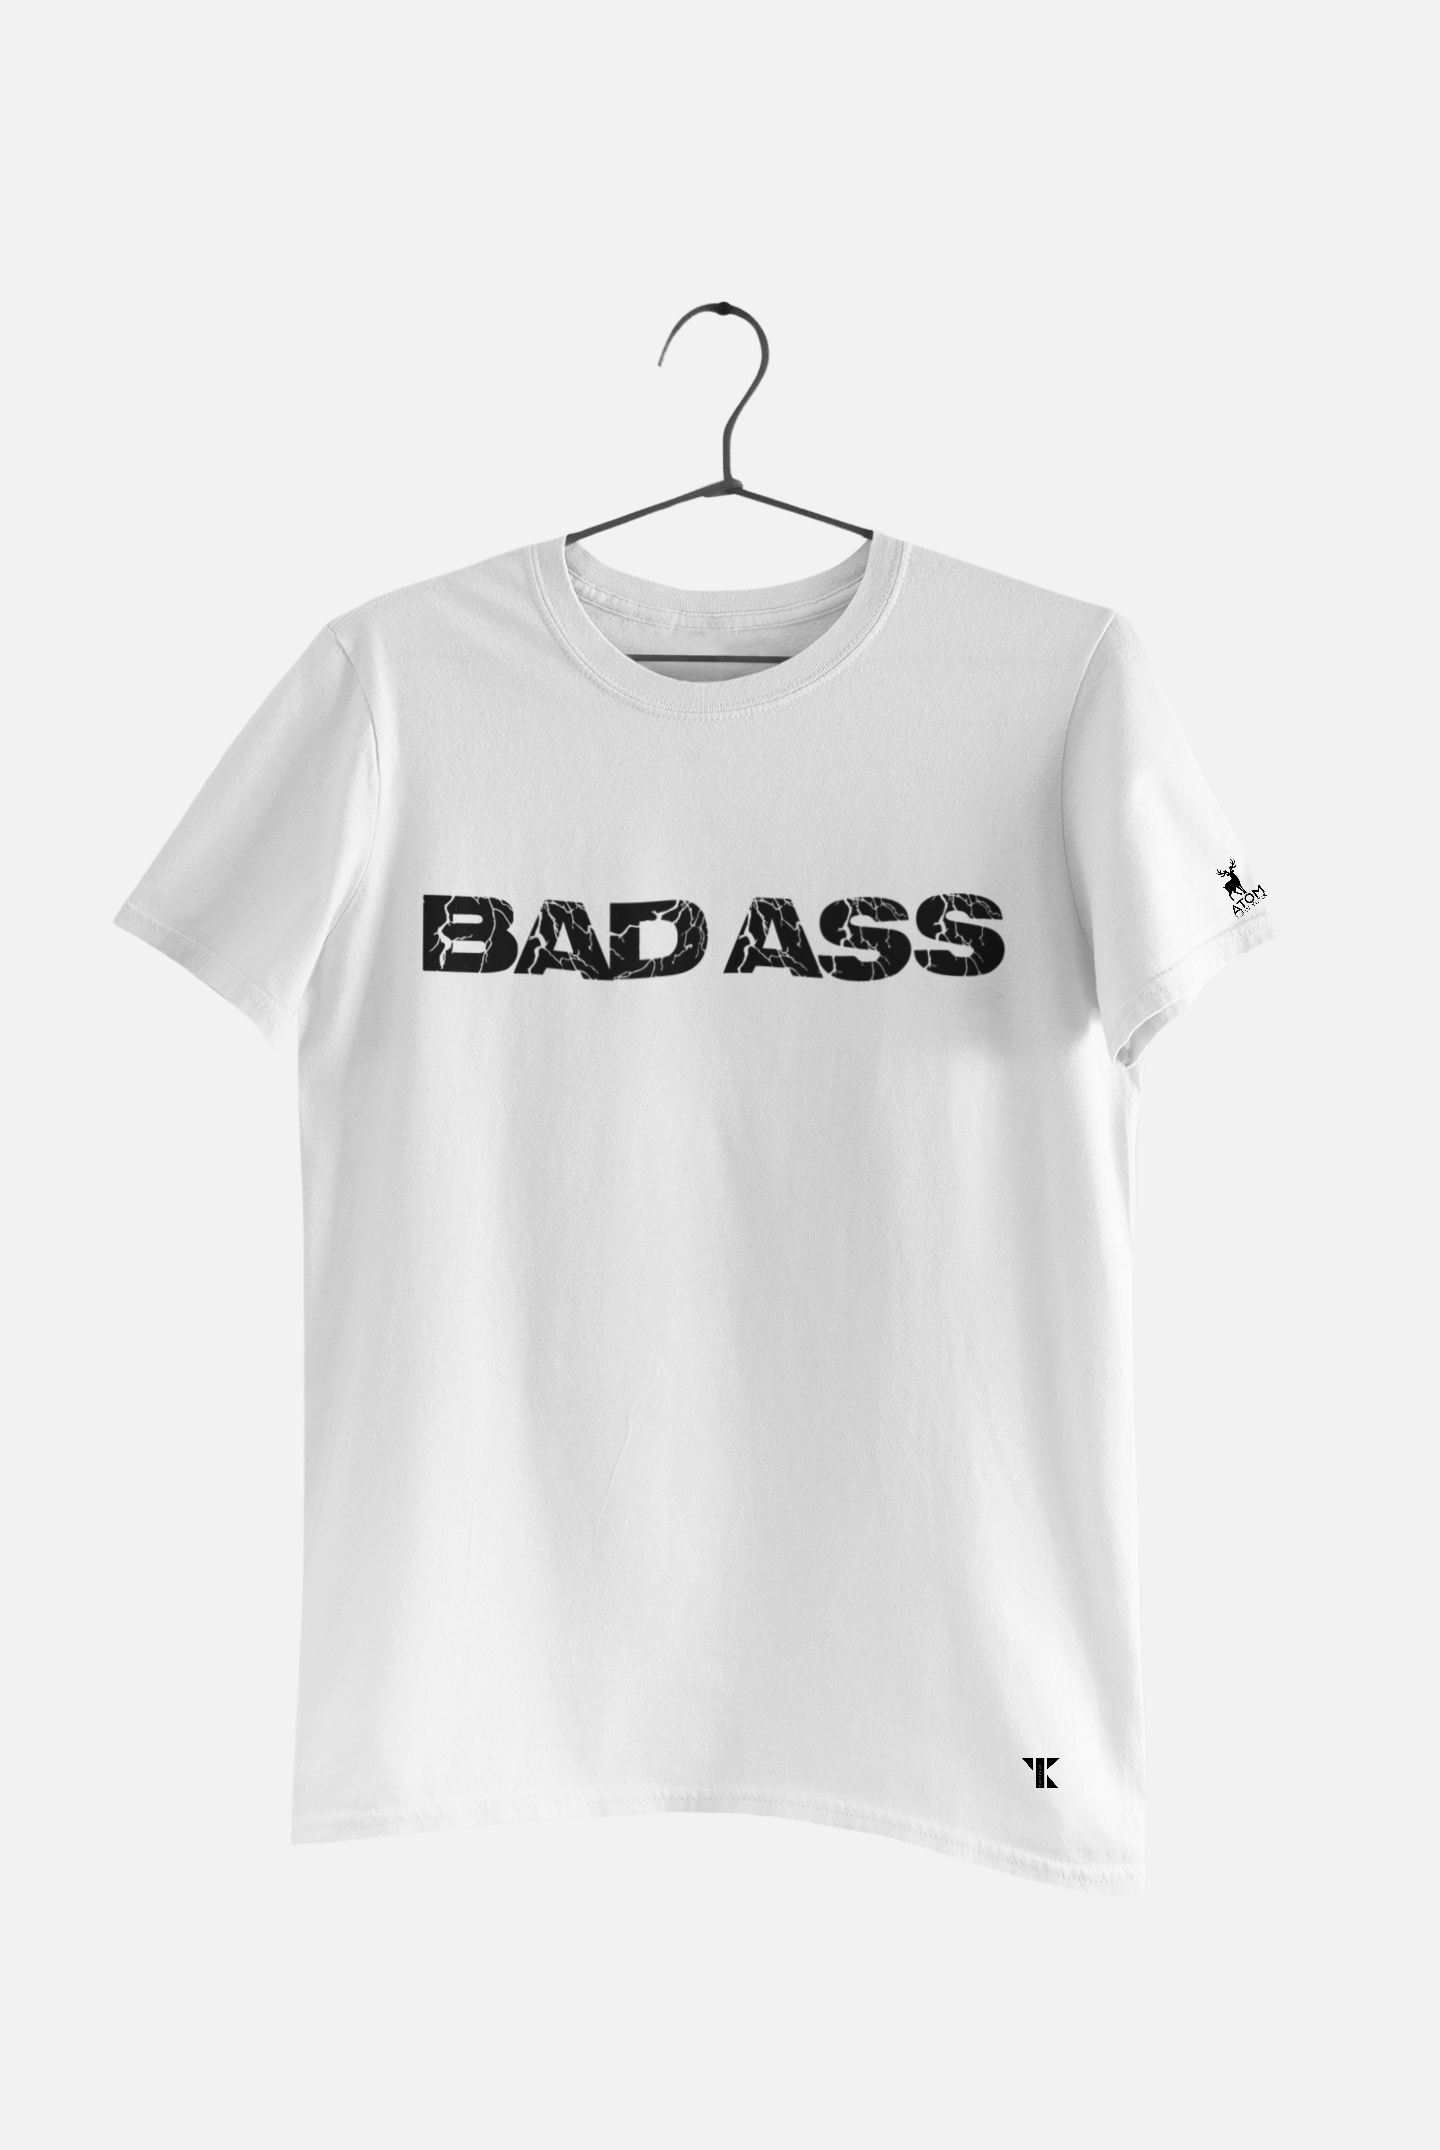 Bad Ass White Pure Cotton T-Shirt For Men | Tarun Kapoor Collection